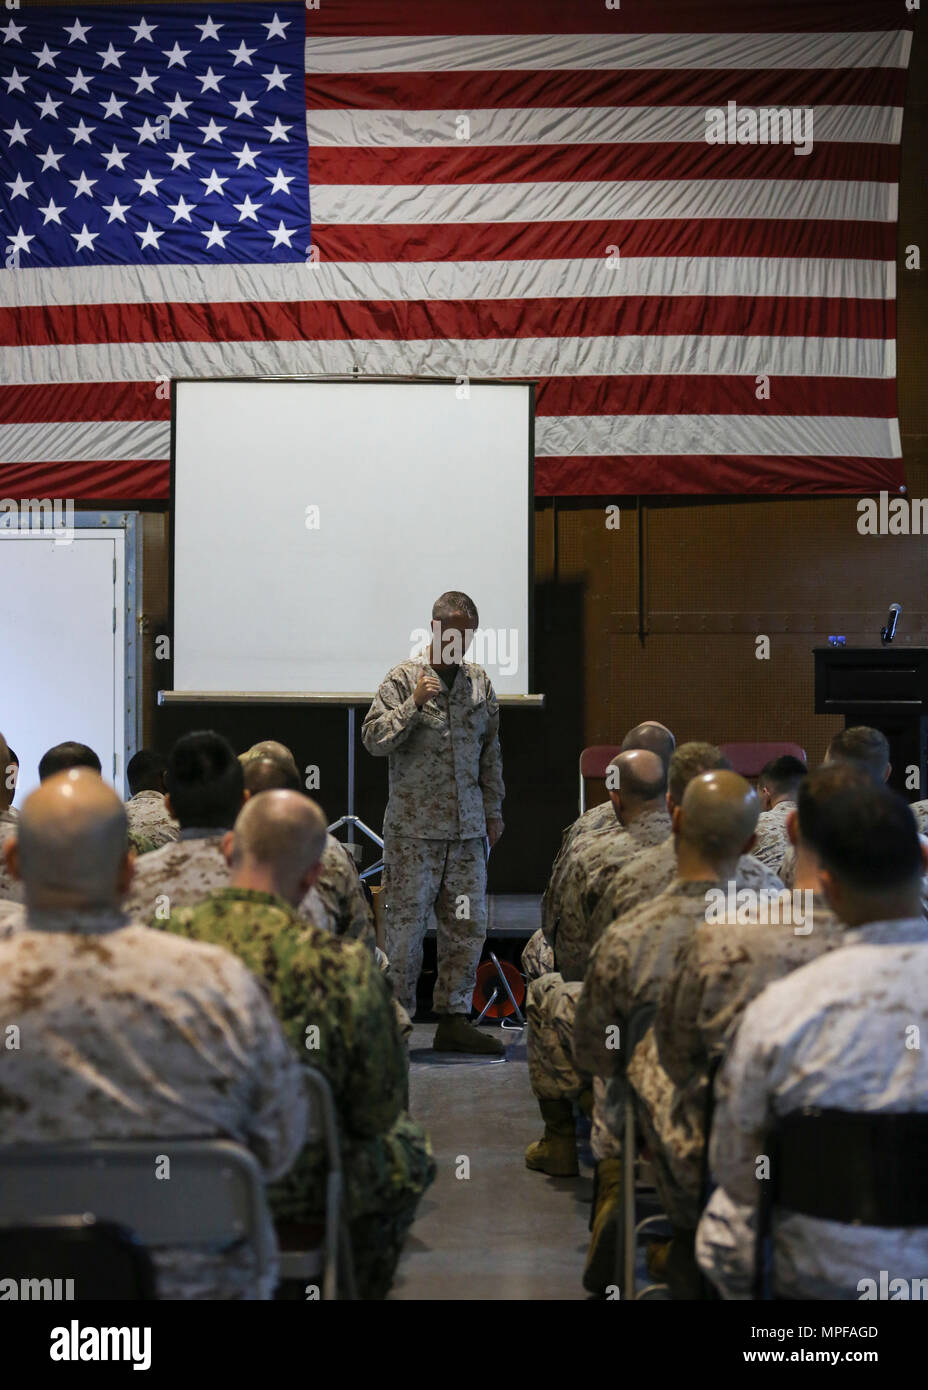 U.S. Marine Sgt. Maj. William T. Thurber, Marine Corps Forces Central Command (MARCENT) Sergeant Major, speaks to the Marines and Sailors of Naval Amphibious Force, Task Force 51/5th Marine Expeditionary Brigade during a command visit at Naval Support Activity Bahrain, Feb. 23, 2017. Lt. Gen. William D. Beydler, MARCENT commanding general and Sgt. Maj. Thurber visited the Marines and Sailors of 51/5 to address evolving topics in the future of the Marine Corps and naval integration. (U.S. Marine Corps photo by Cpl. Lucio Jessica Y. /RELEASED) Stock Photo